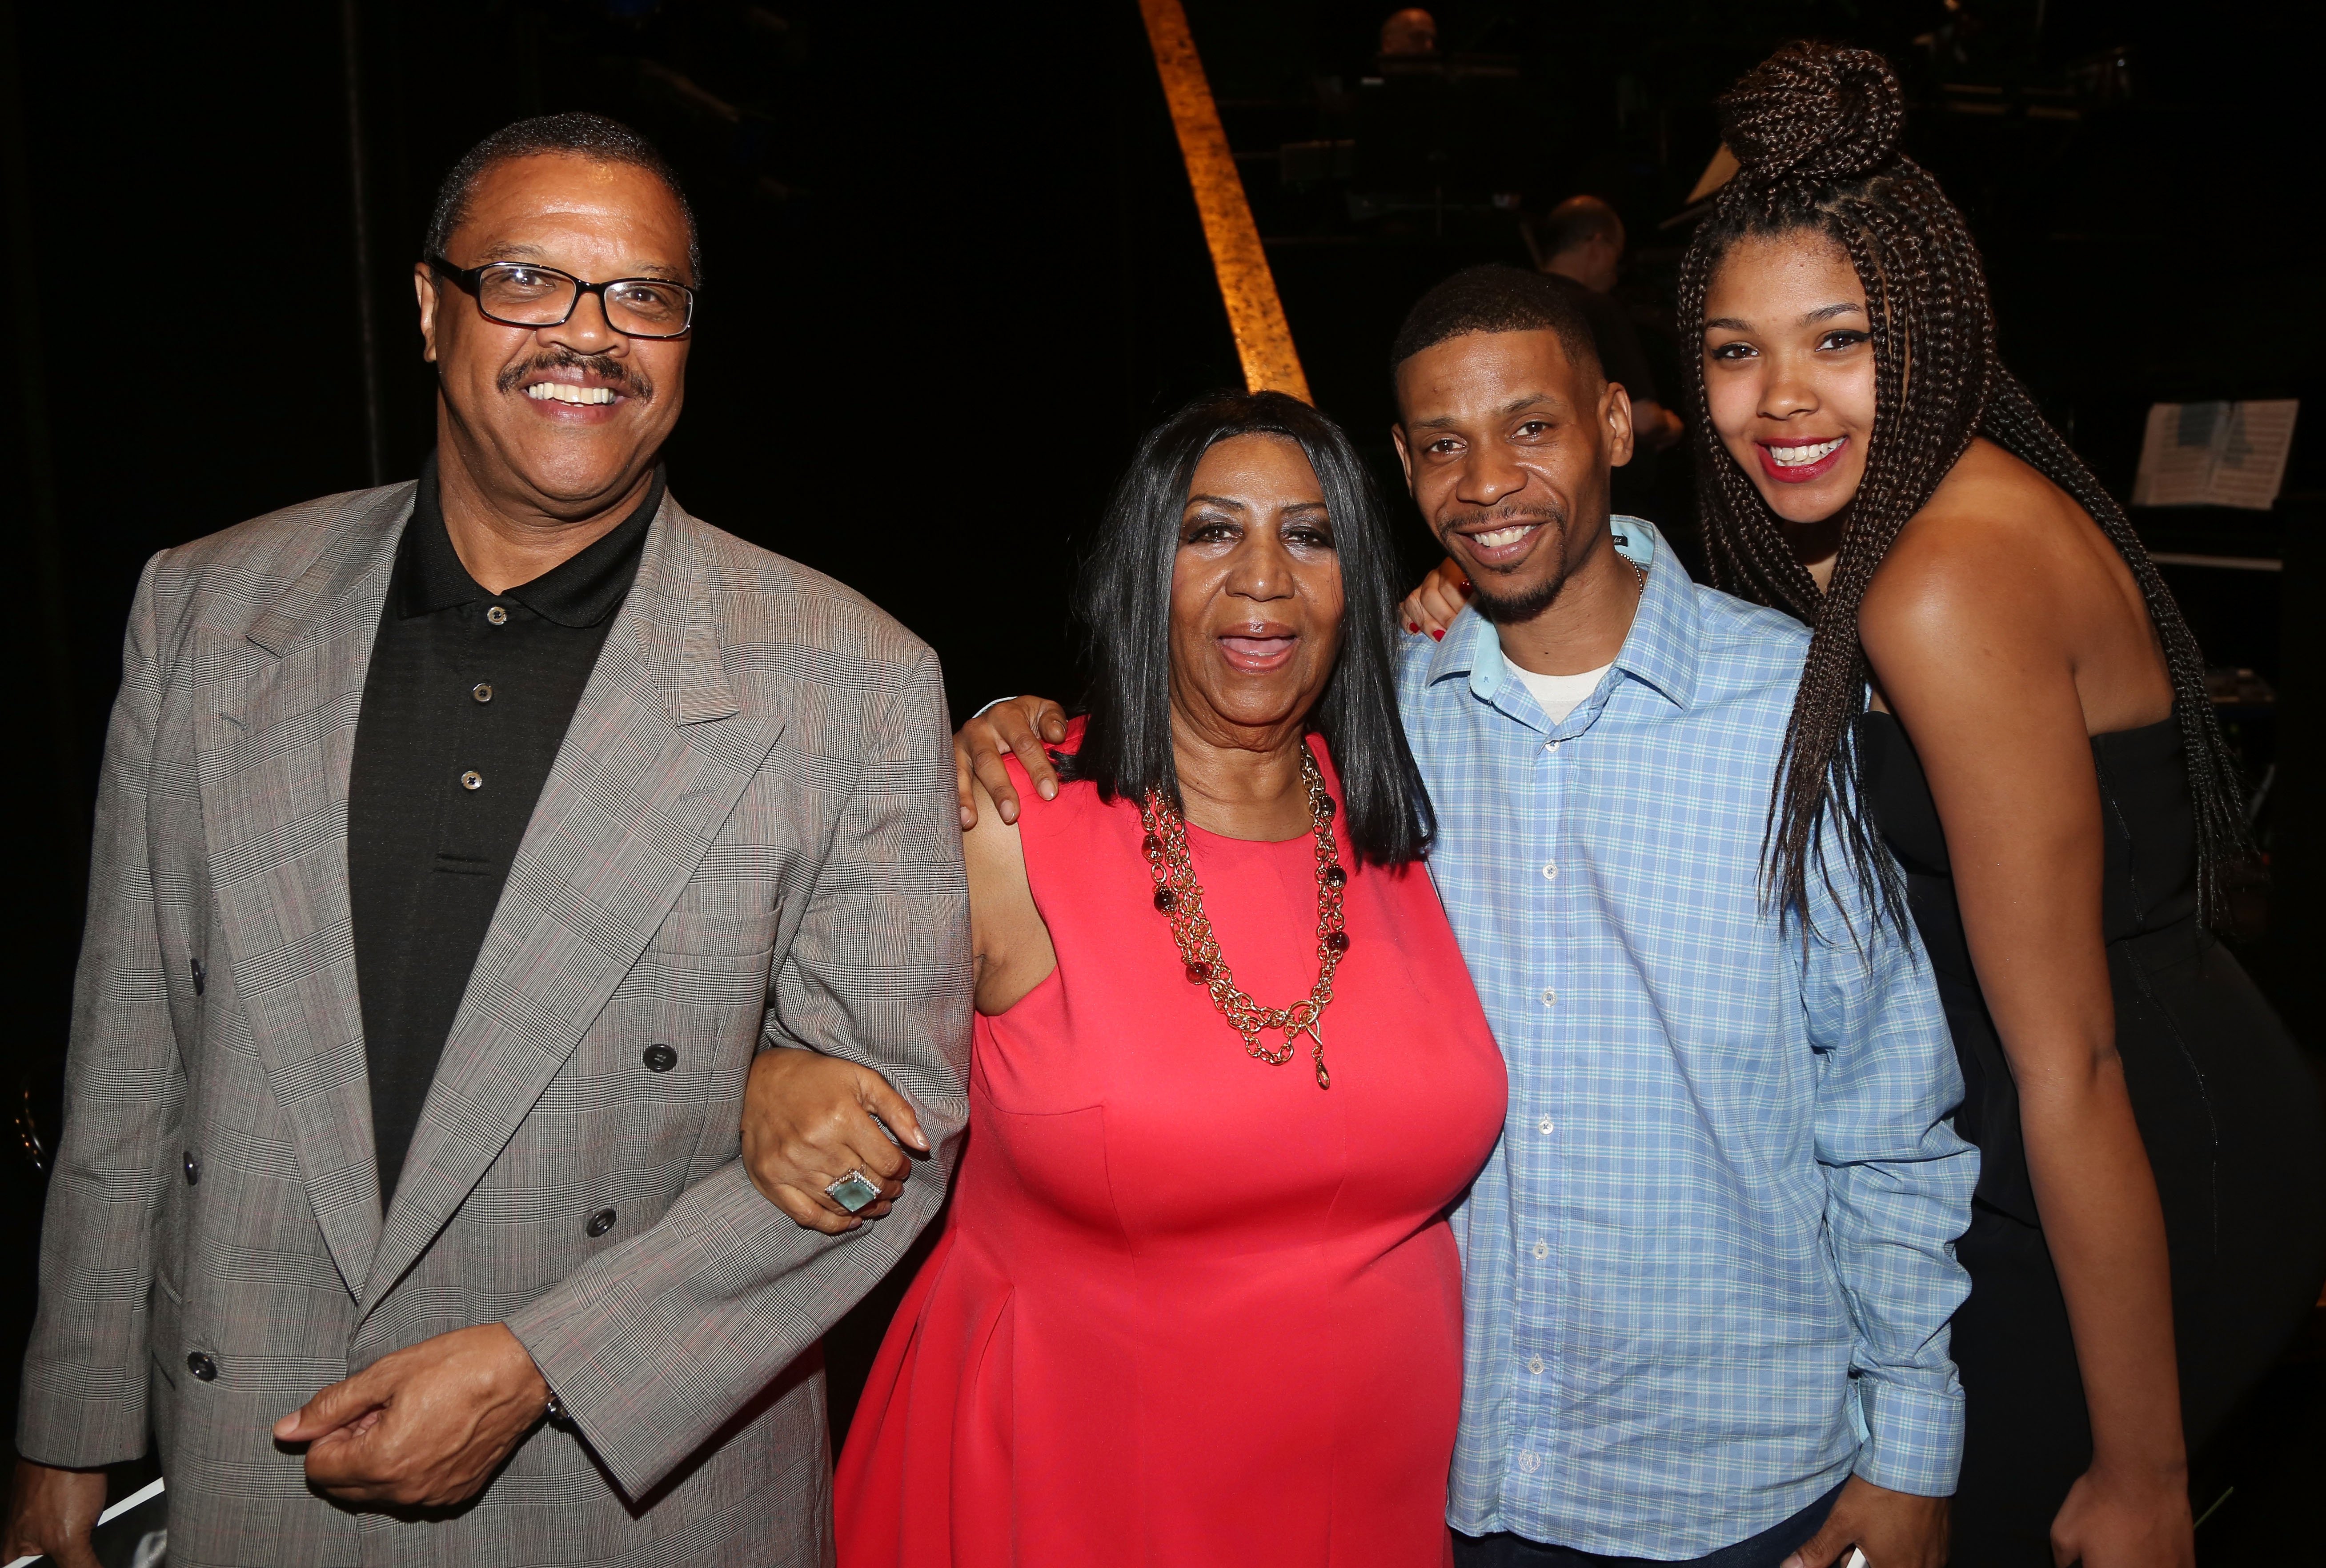 Willie Wilkerson, Aretha Franklin, Kecalf Cunningham and Victorie Cunningham at the musical "Chicago" on May 29, 2015 in New York City | Photo: Getty Images